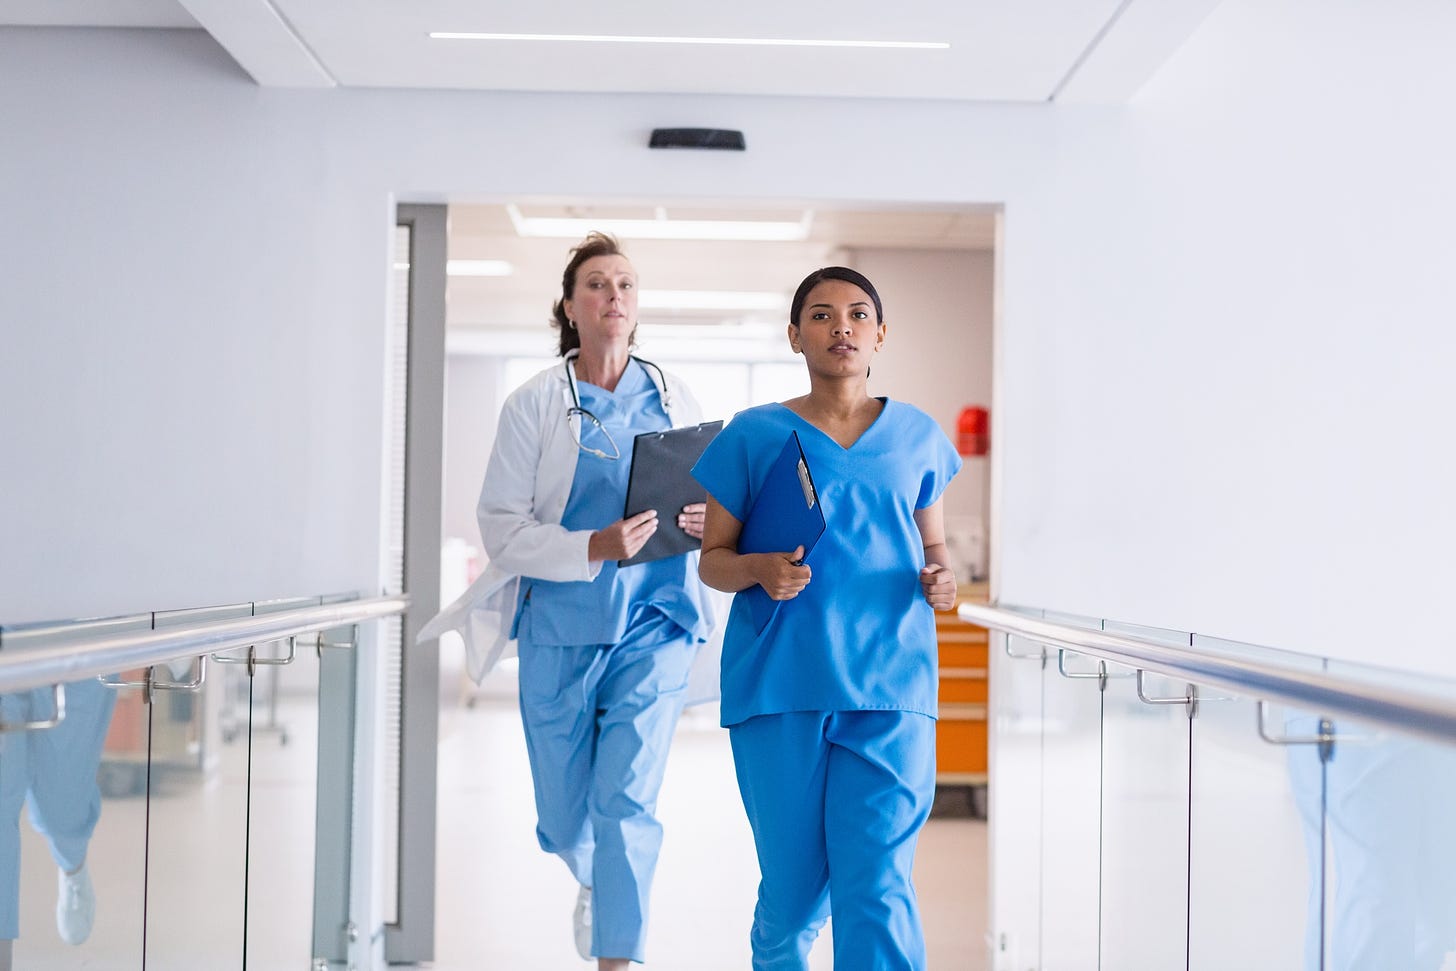 6 Simple Ways Nurses Can Save Time During a Shift